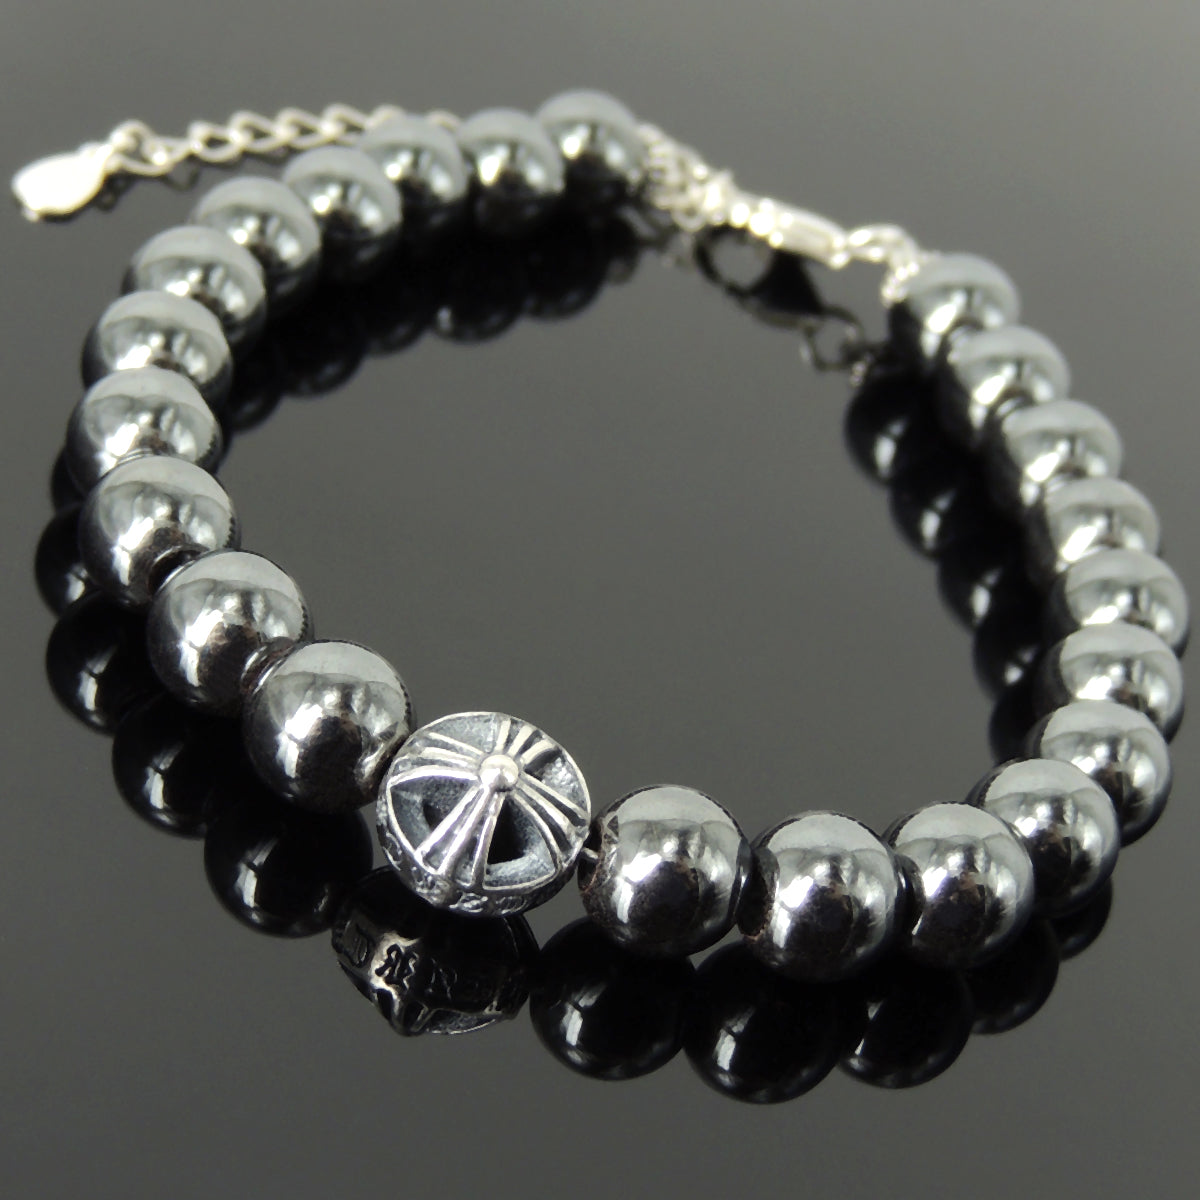 8mm Hematite Stone Bracelet with S925 Sterling Silver Round Celtic Engraved Cross Bead, Chain & Clasp - Handmade by Gem & Silver BR1391